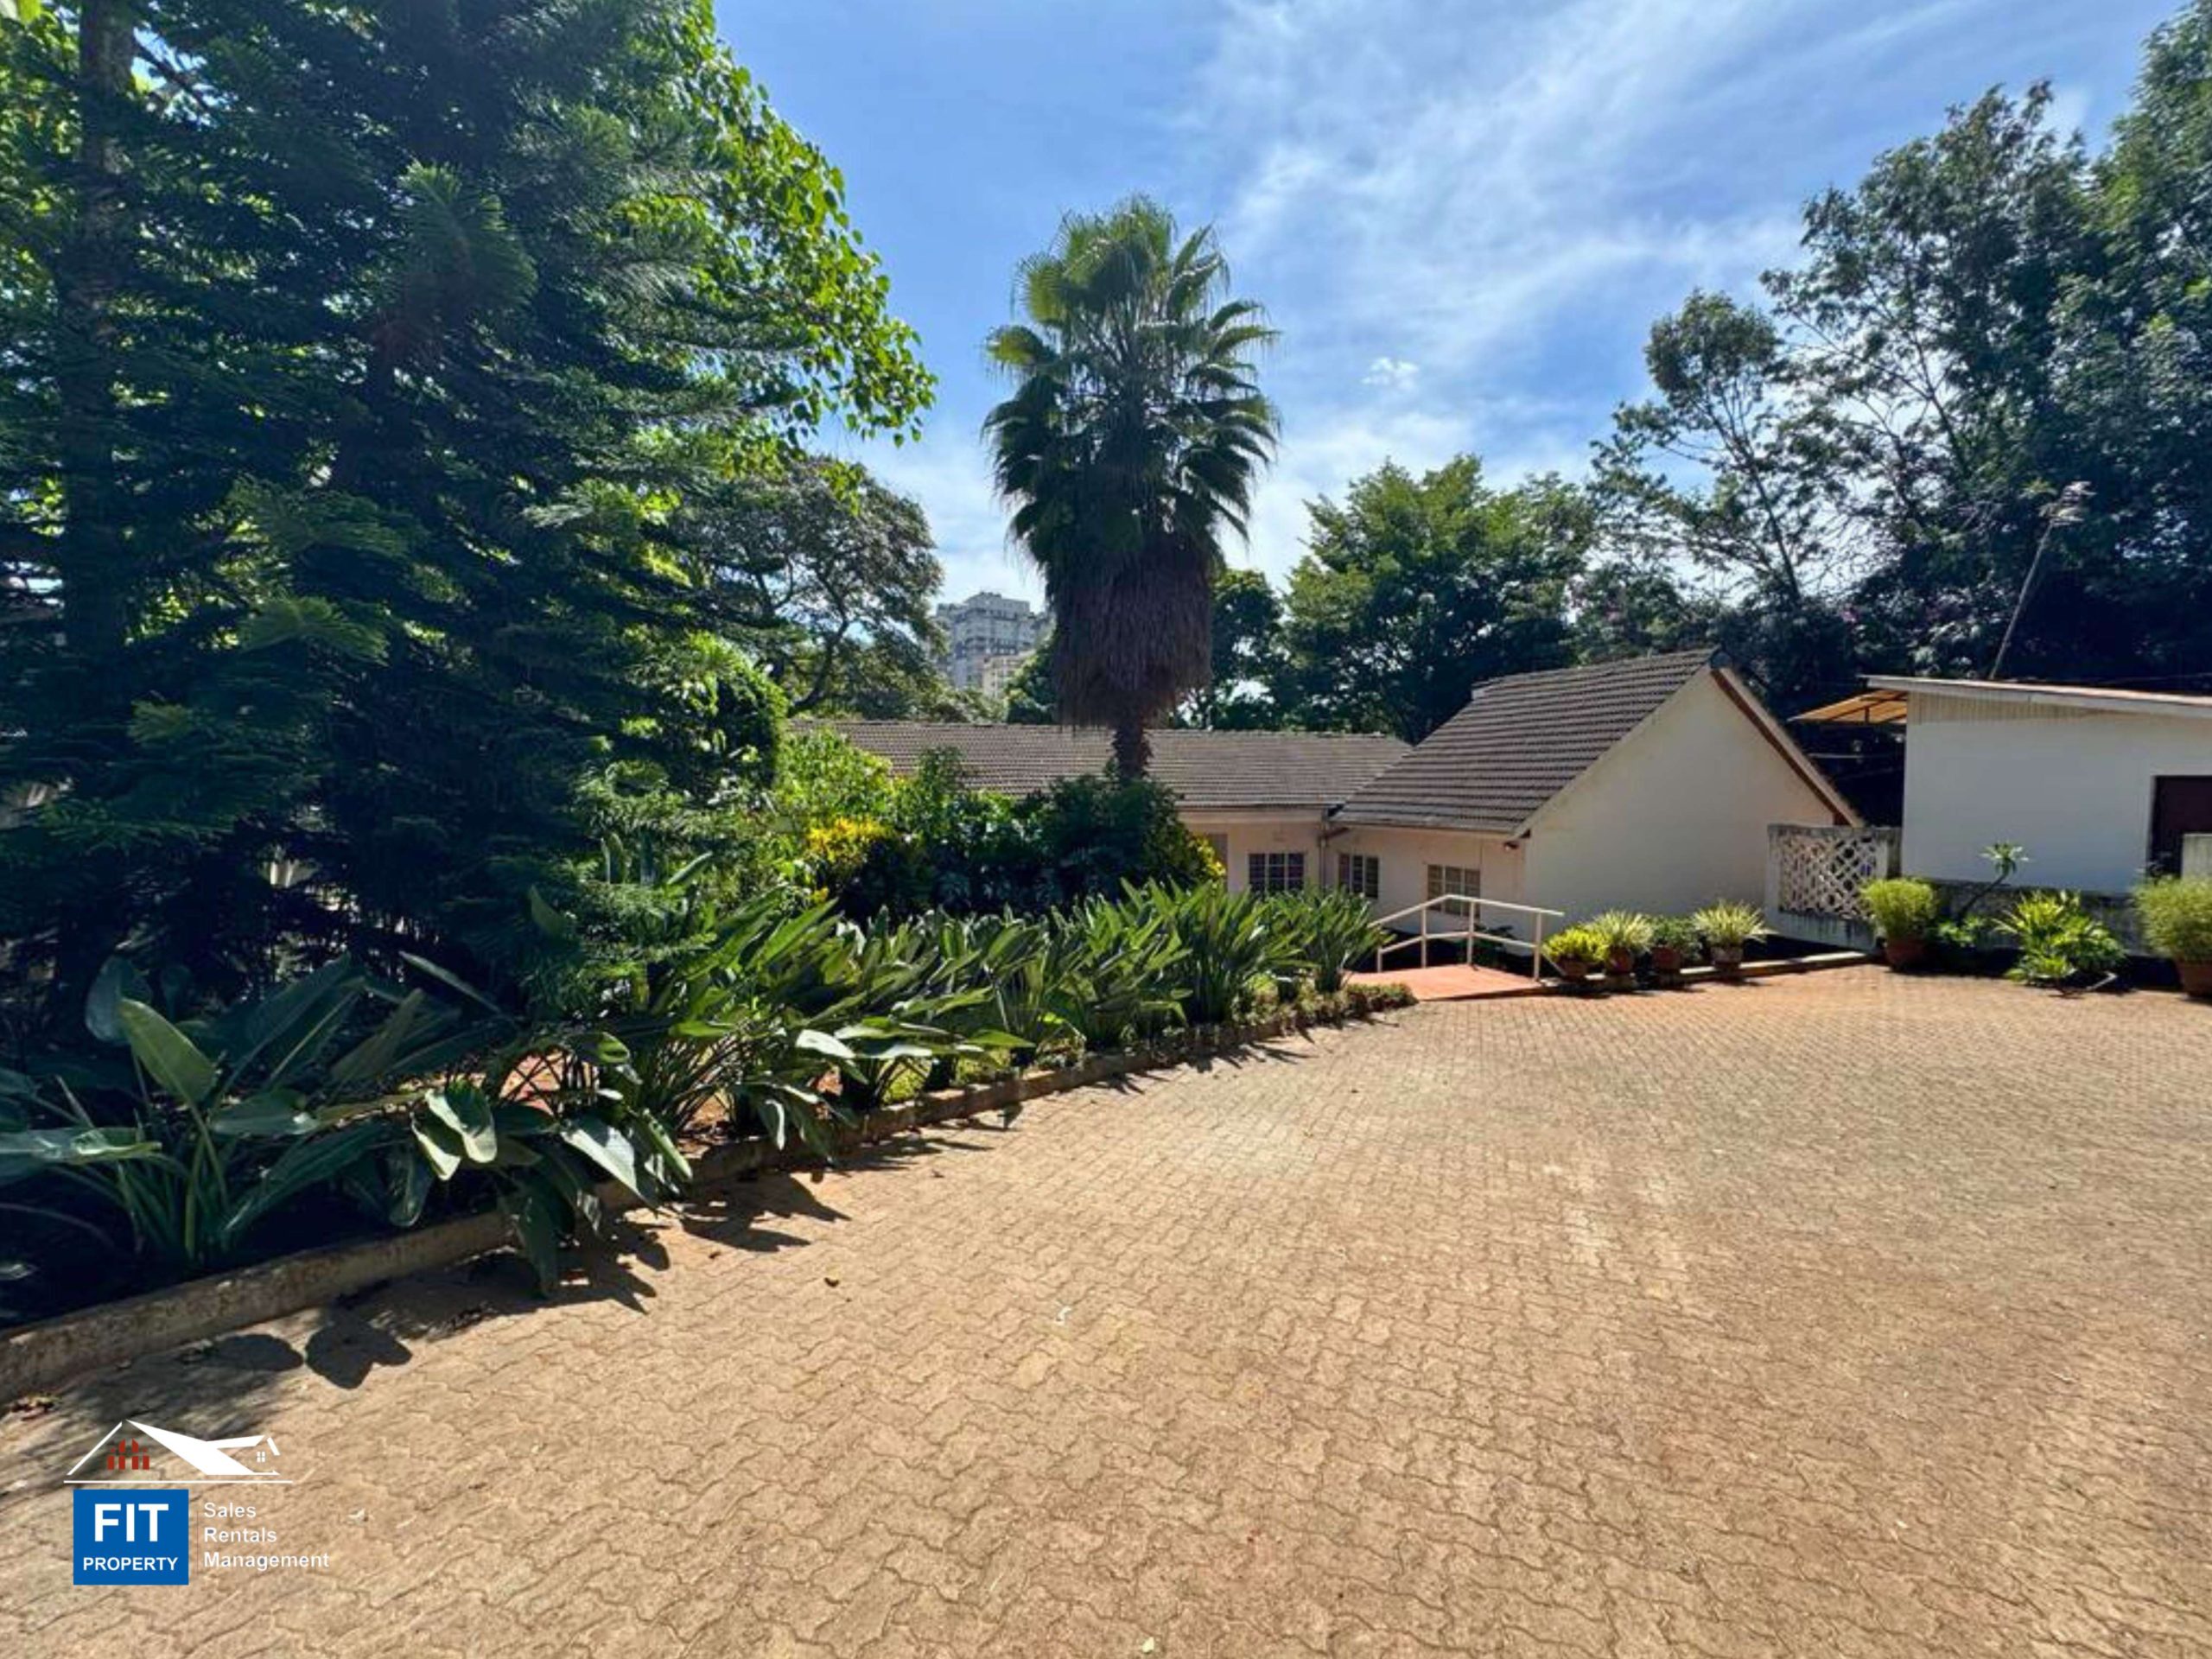 Exceptional 0.5 Acre Land 3 Bedroom Bungalow Parcel in Spring Valley, Nairobi. Rectangular plot currently adorned with a charming three-bedroom bungalow. 100 Million FIT PROPERTY